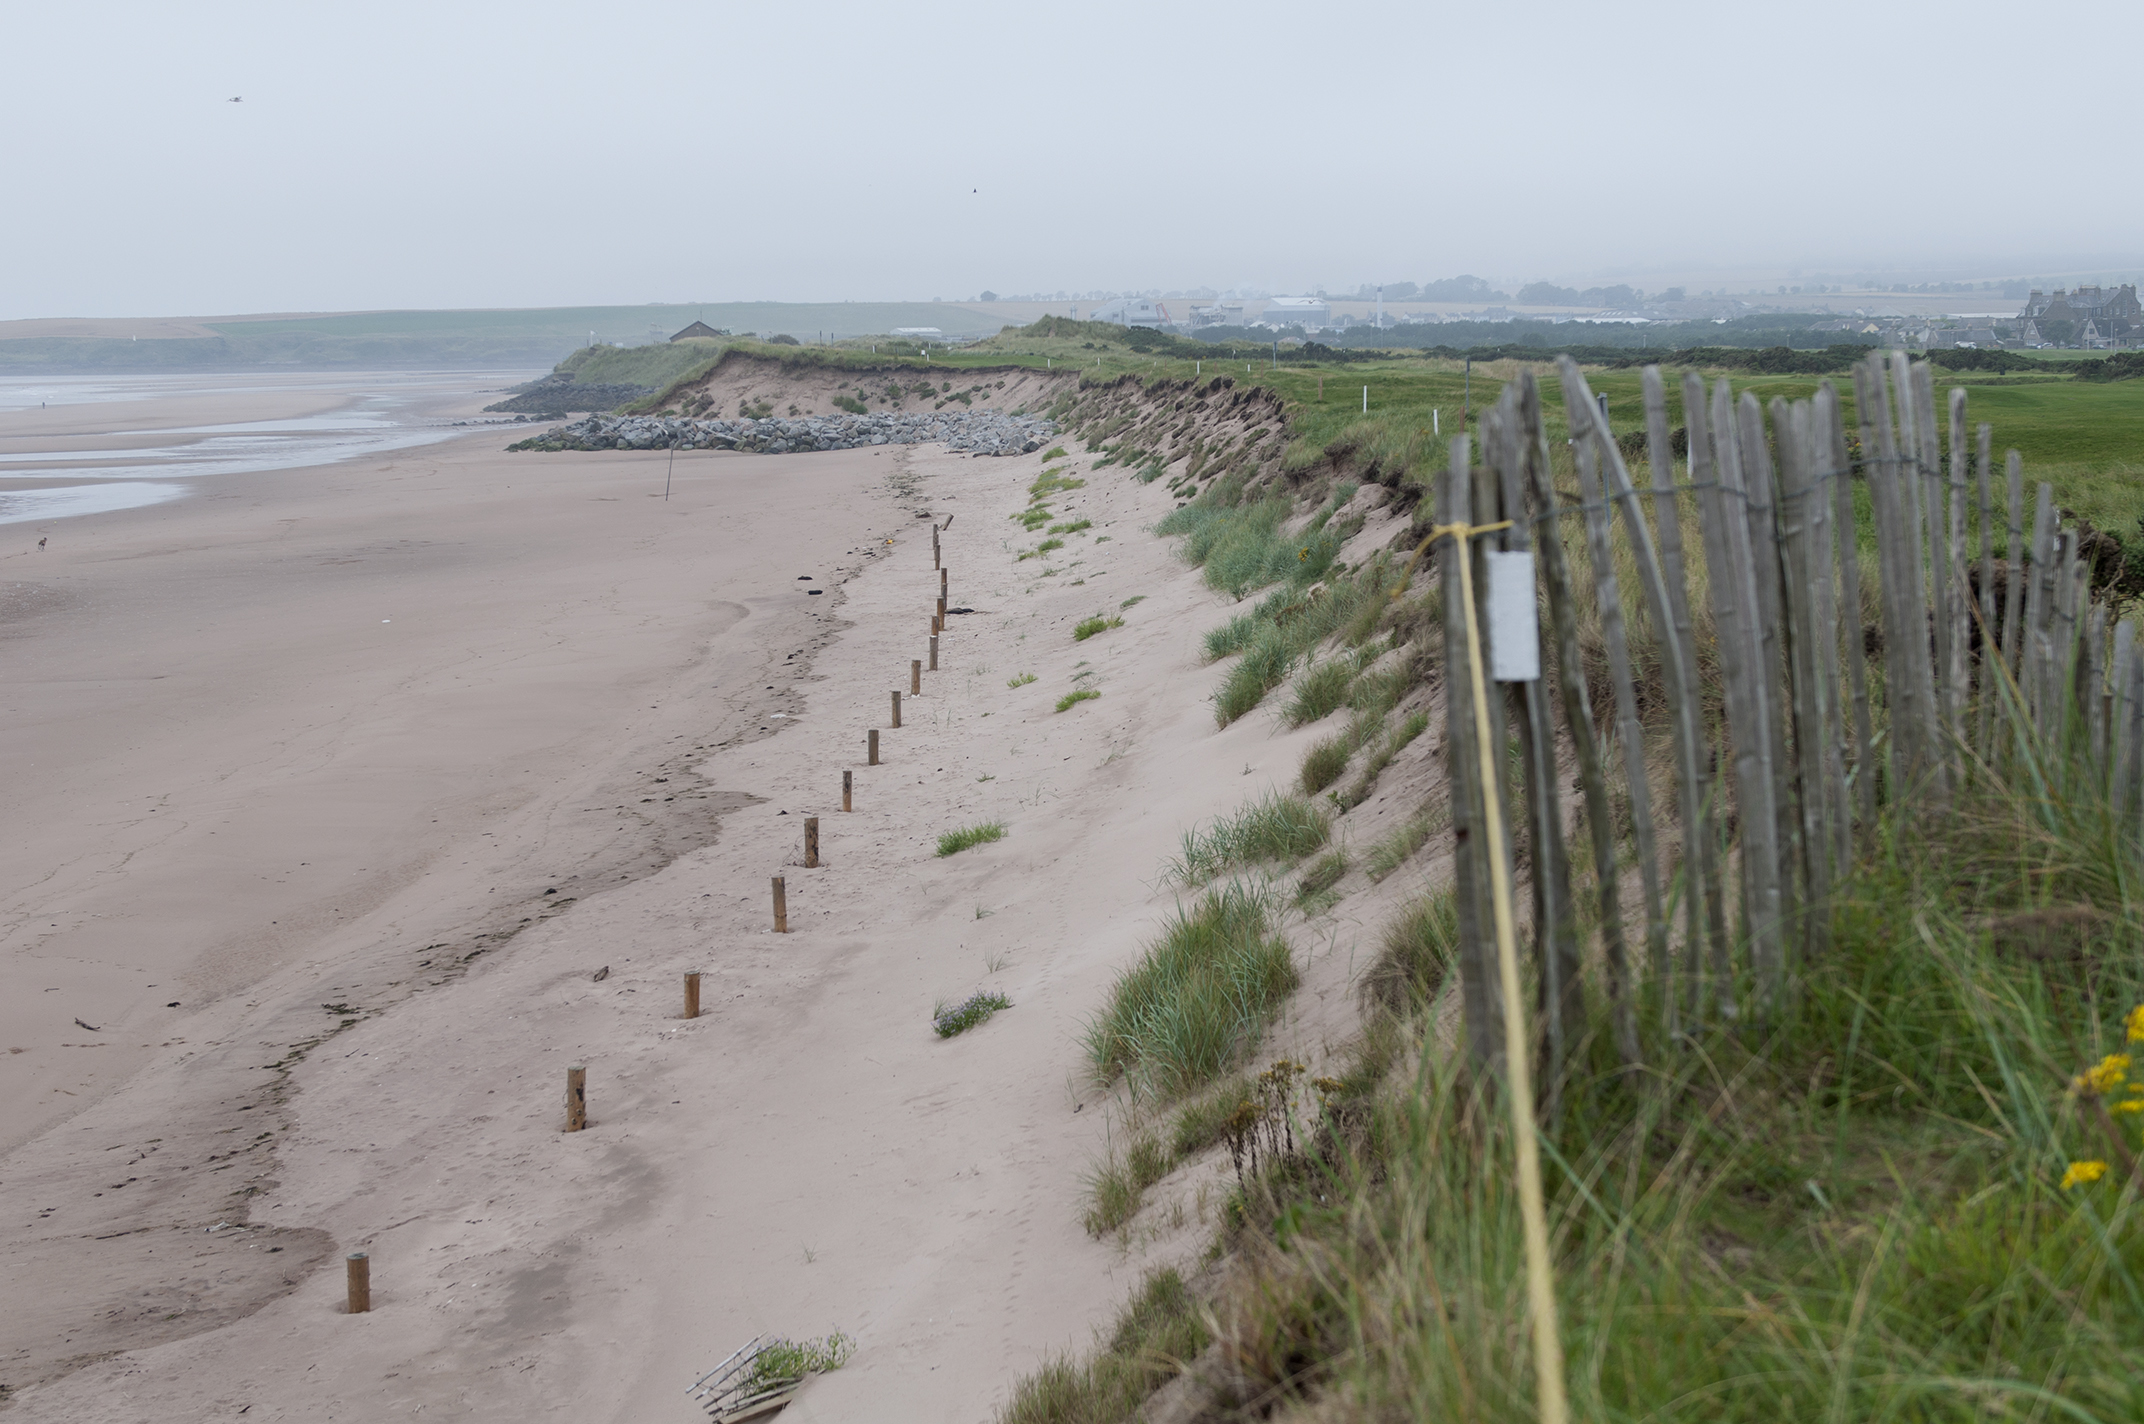 The erosion crisis at Montrose was first identified 20 years ago